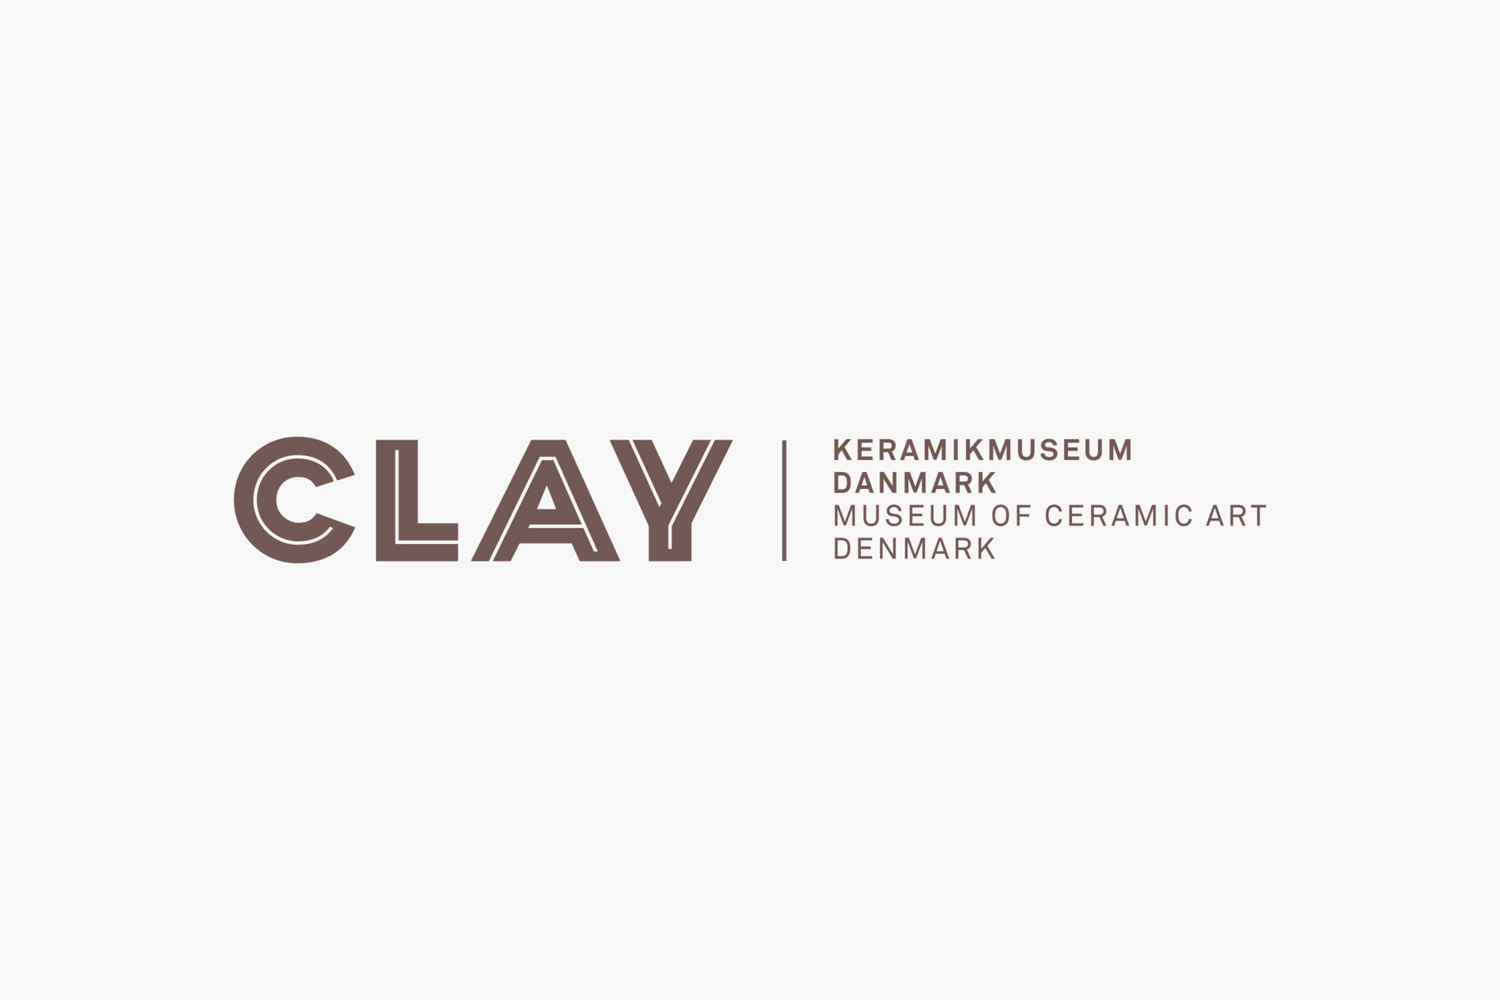 Logotype for Clay — Museum of Ceramic Art Denmark by Studio Claus Due